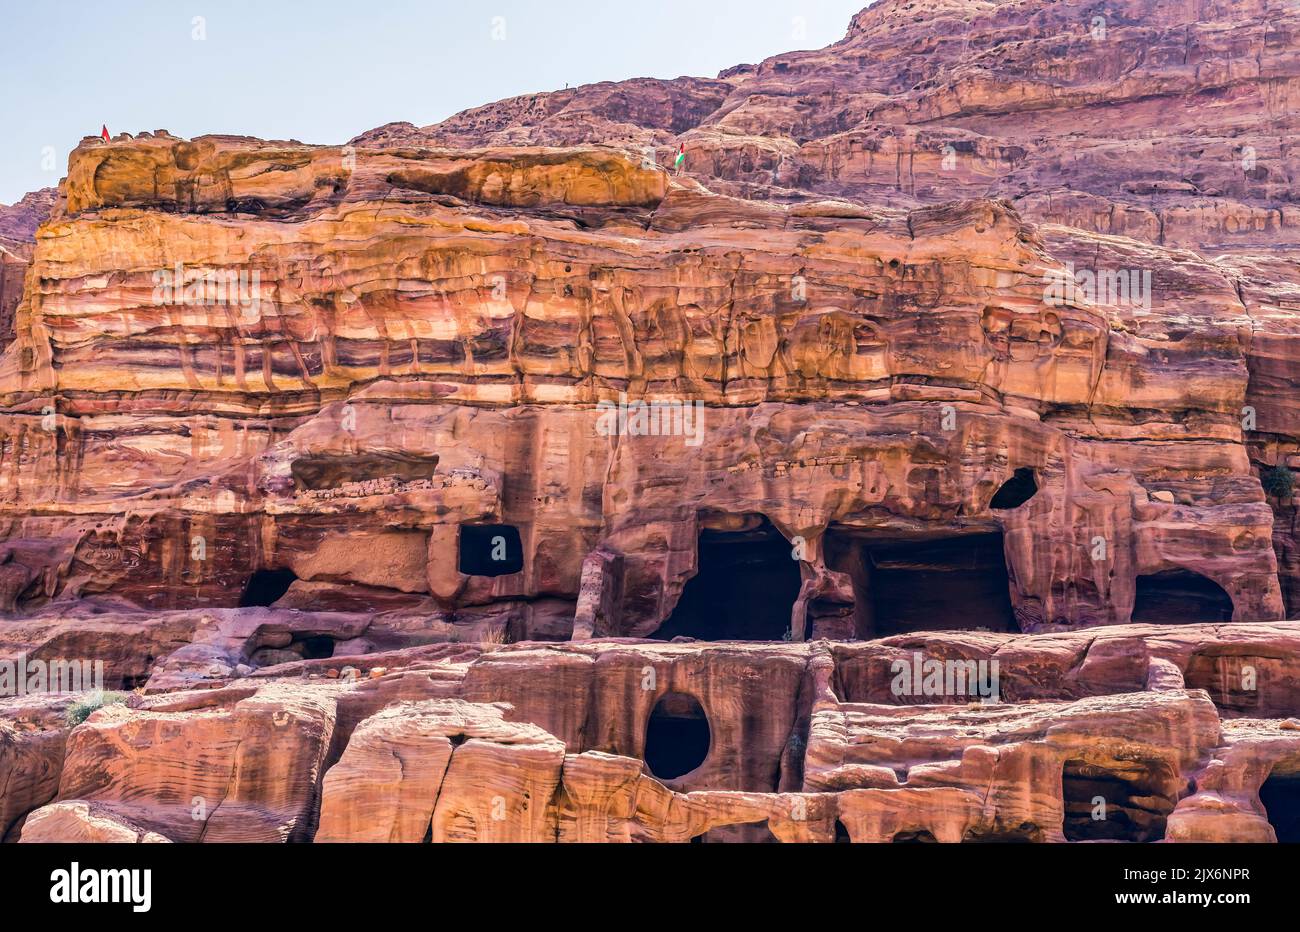 Rose Red Rock Tombs Morning Street of Facades Petra Jordan Built by Nabataens in 200 BC to 400 AD Canyon walls change Rose Red afternoon when sun goes Stock Photo